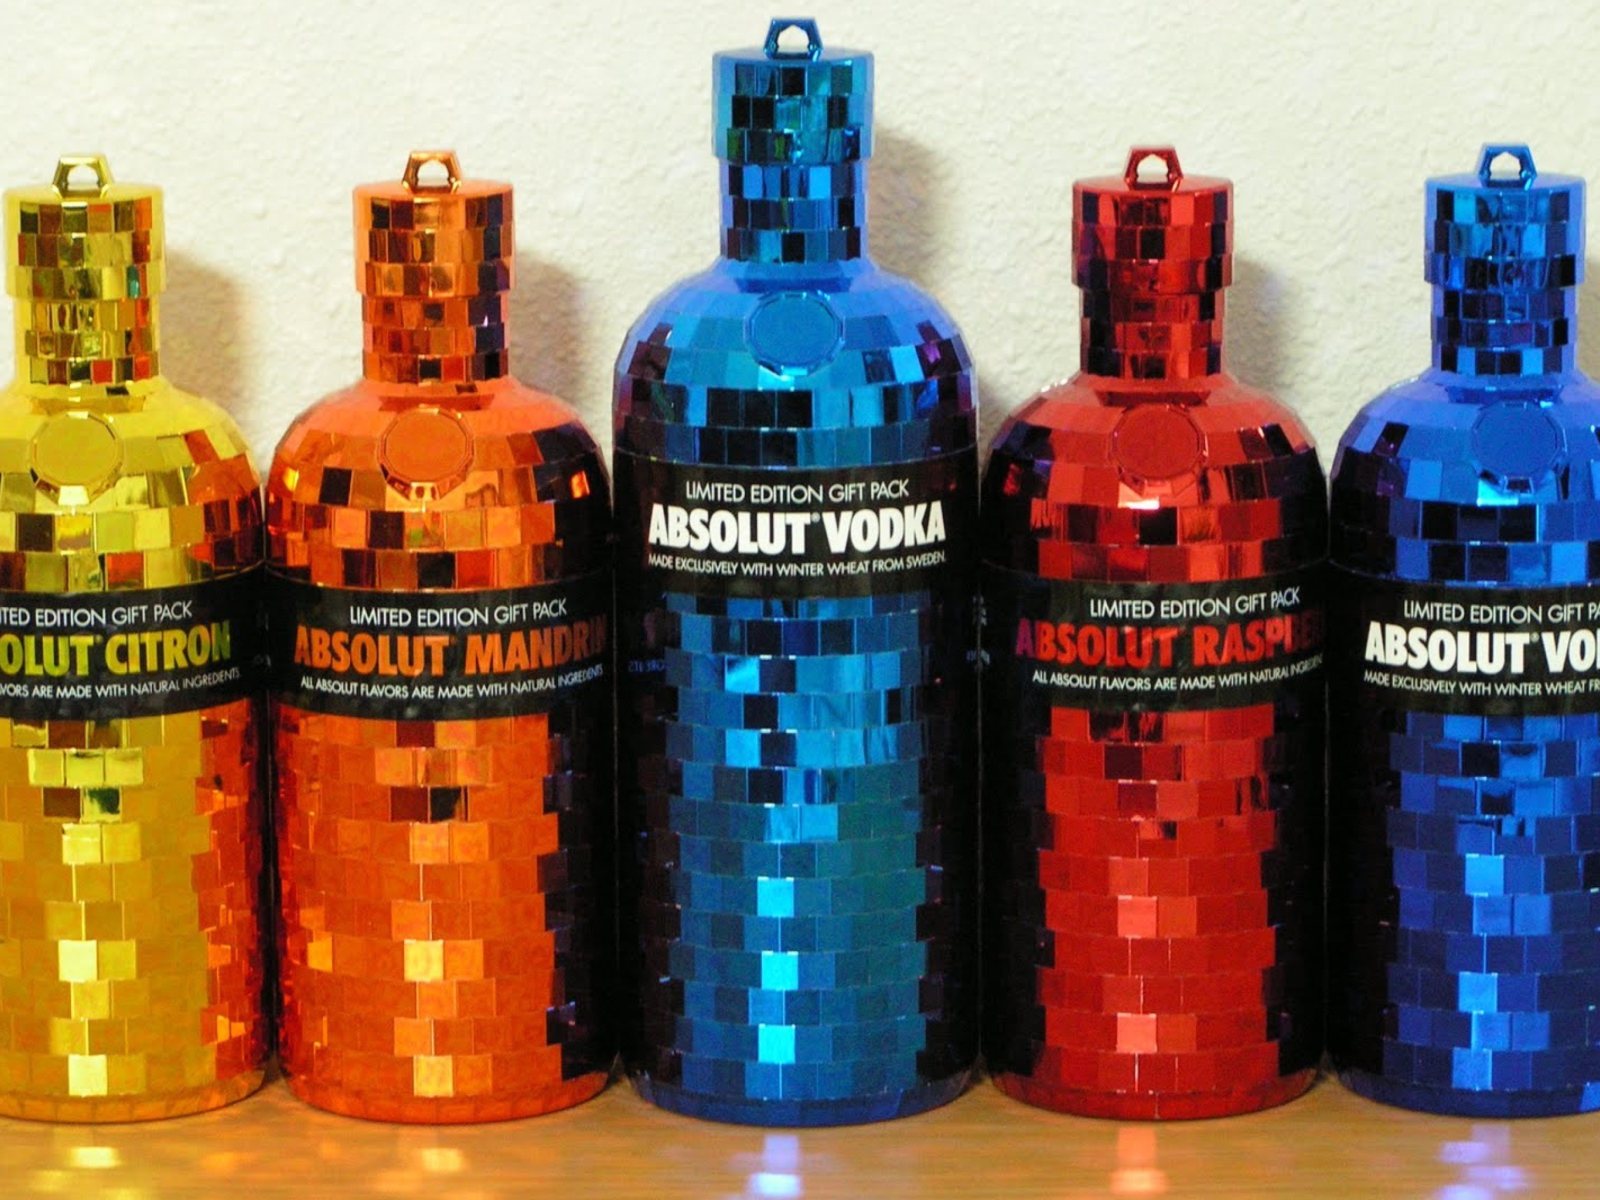 Absolut Vodka Limited Edition wallpaper 1600x1200